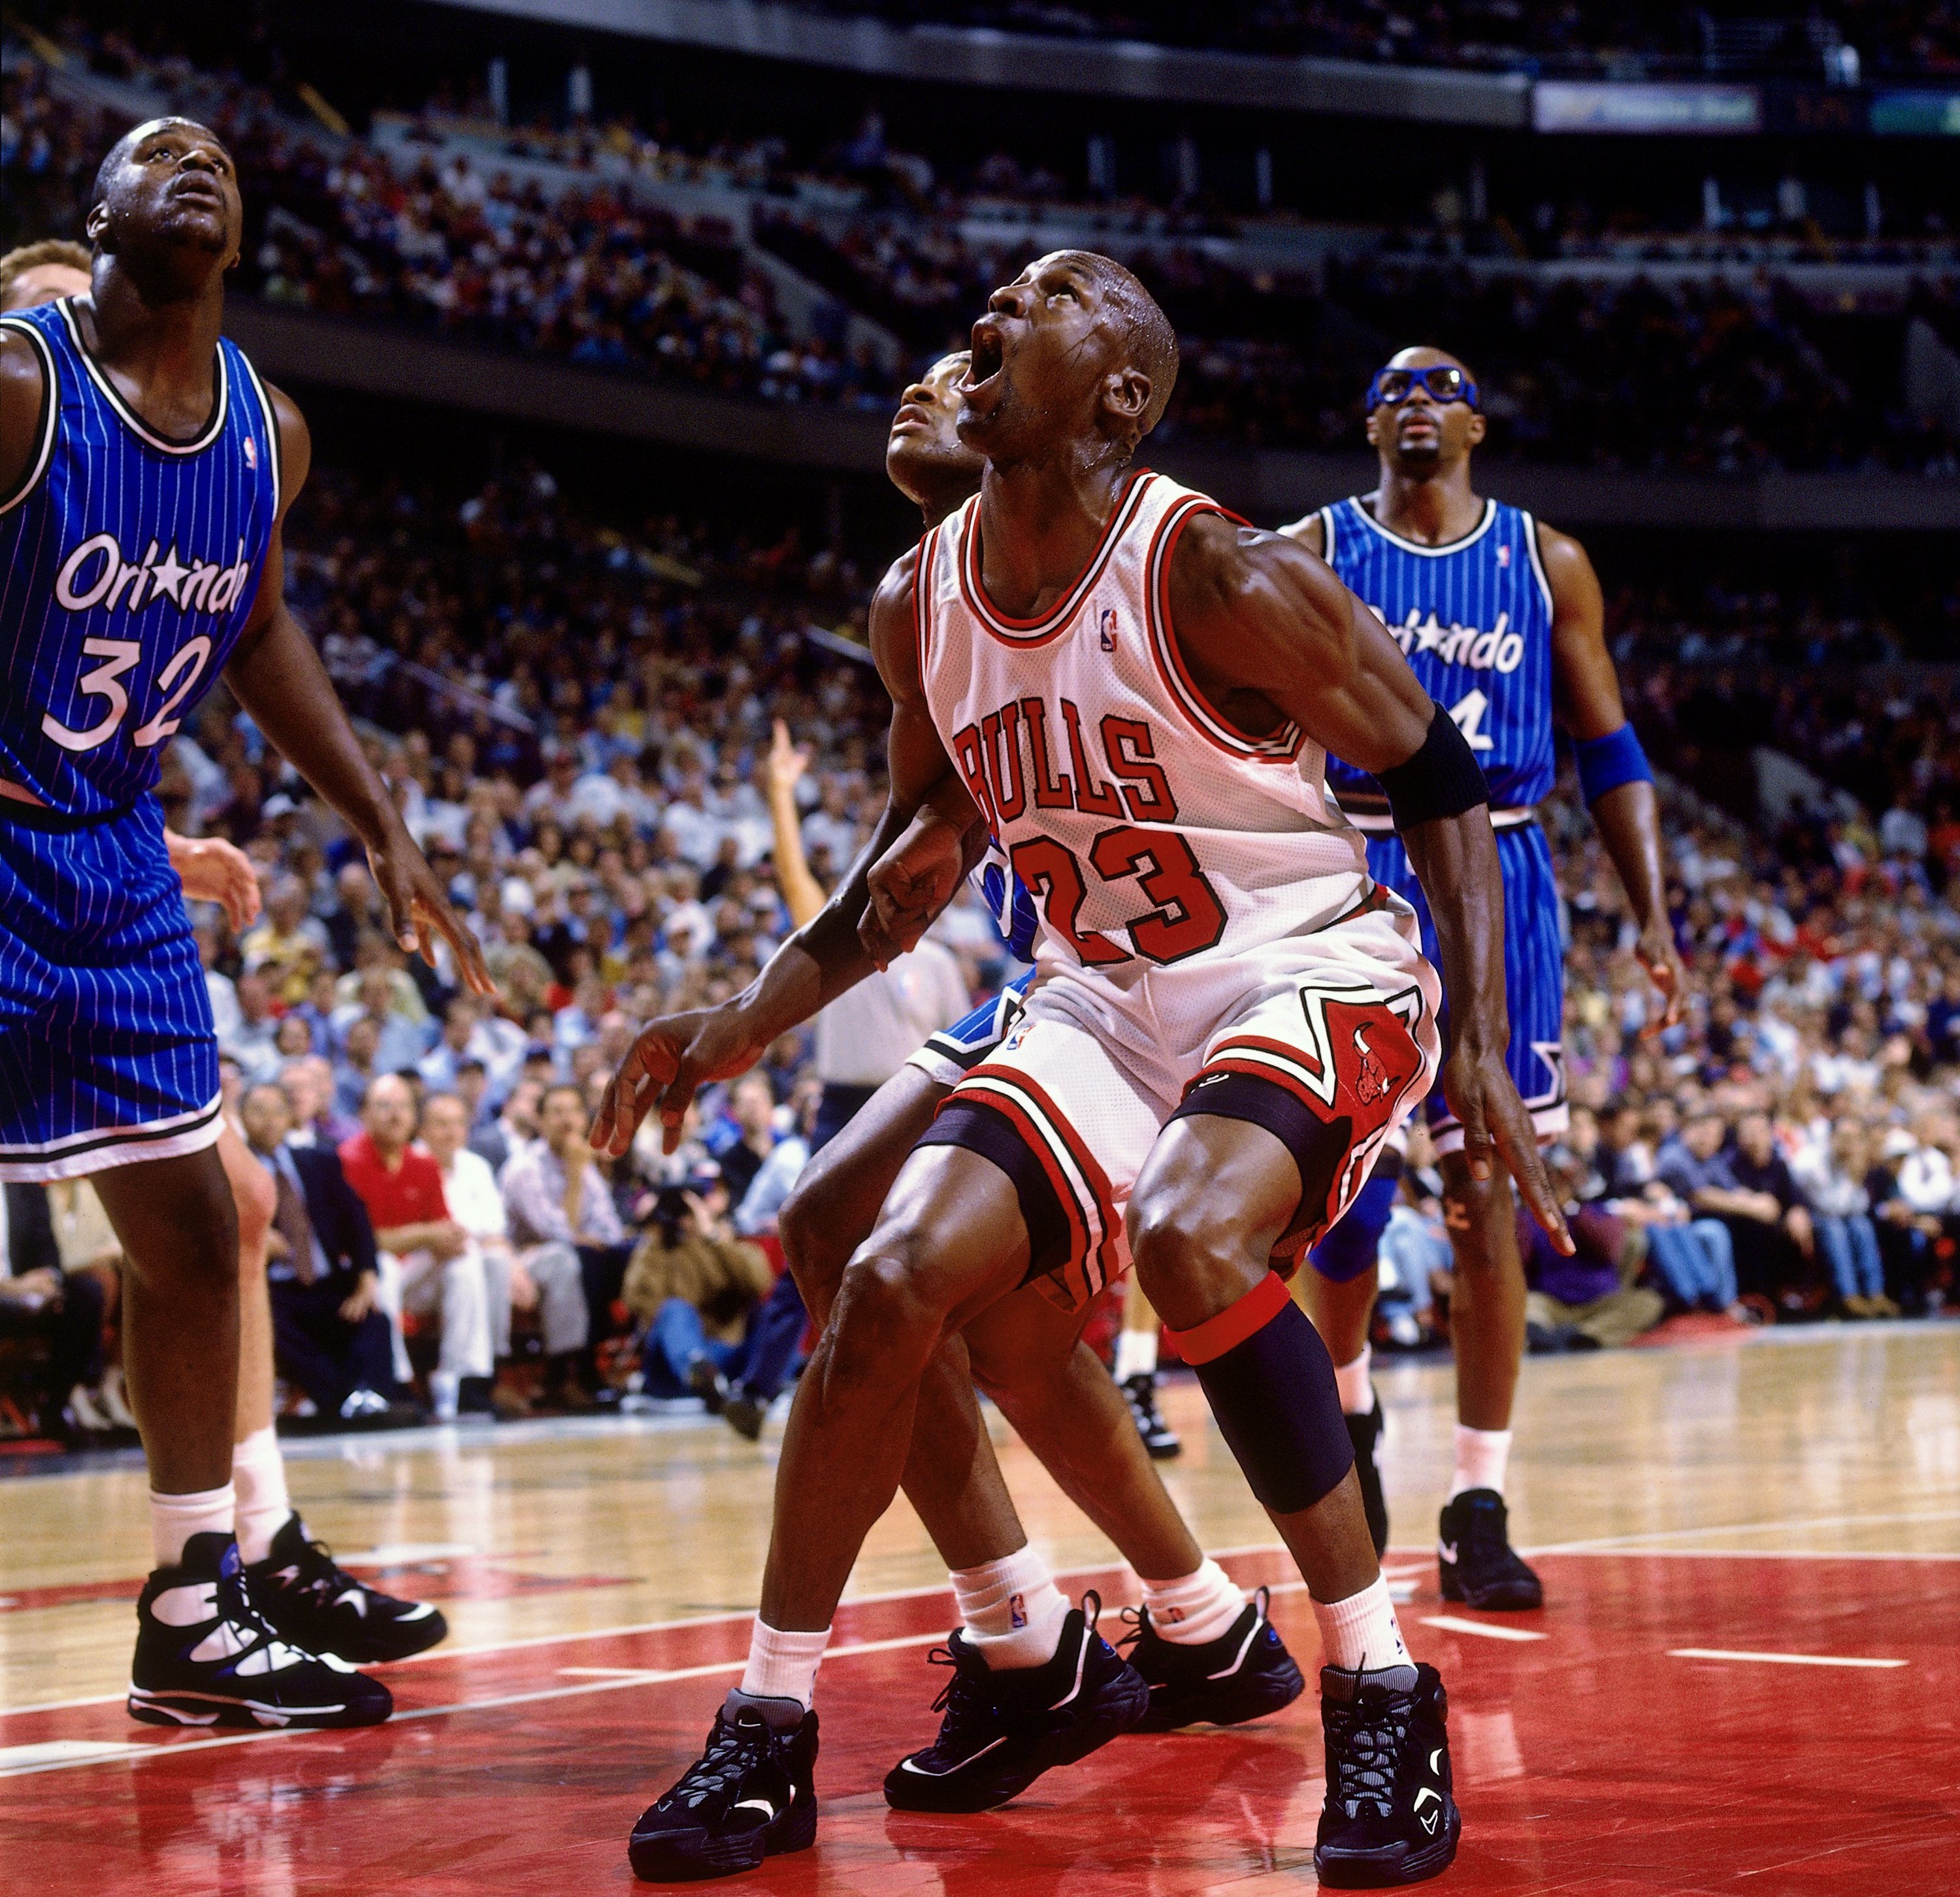 Michael Jordan During Game 3 of the 1995 NBA Eastern Conference Semifinals